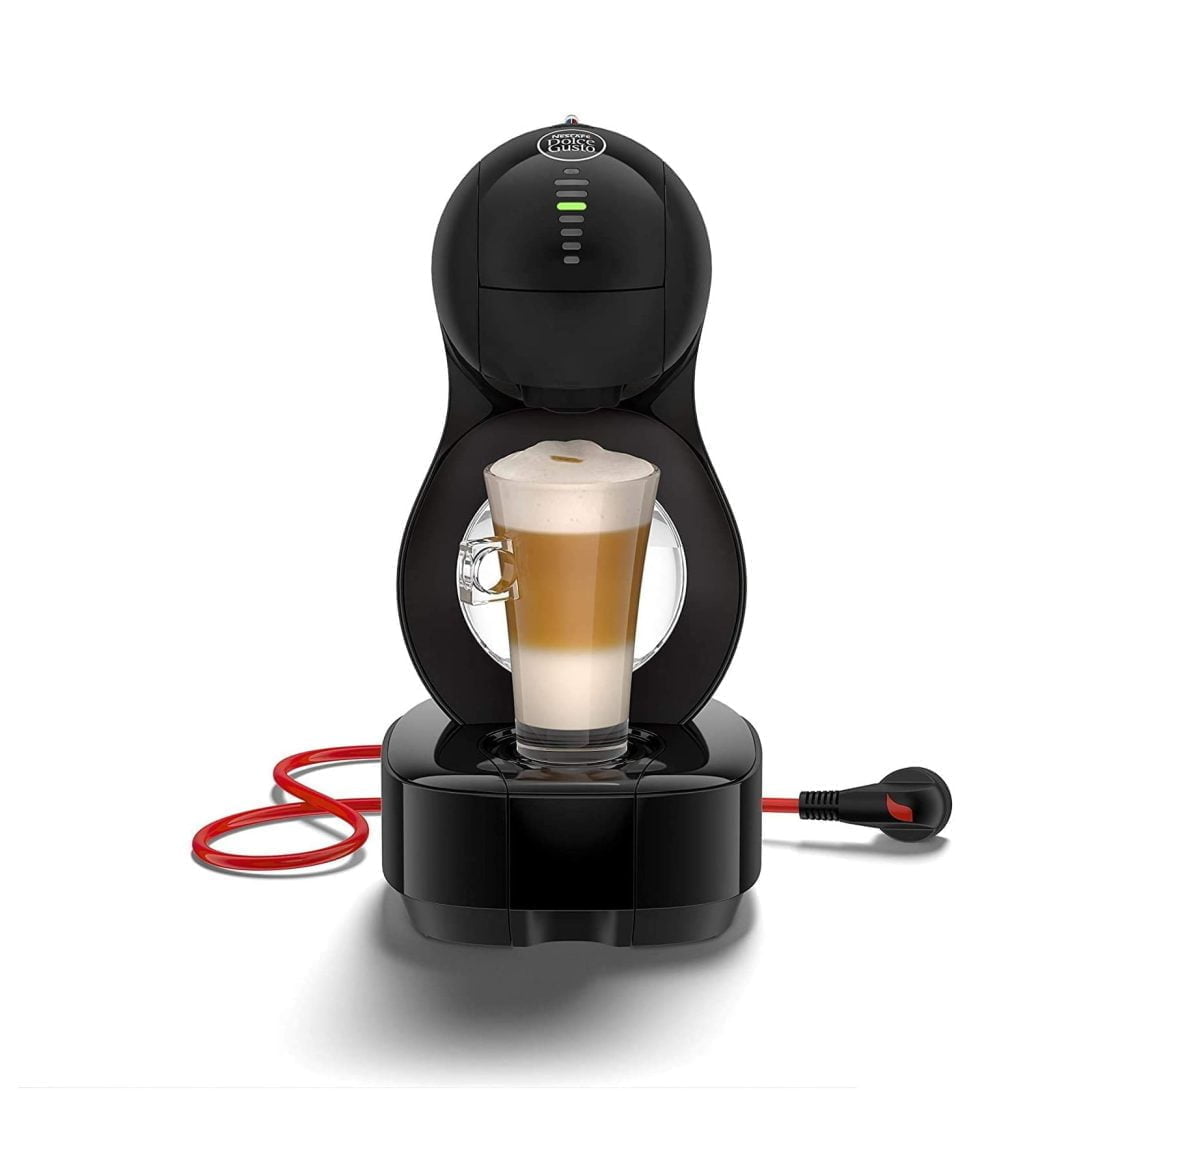 Nescafe &Lt;H1 Id=&Quot;Title&Quot; Class=&Quot;A-Size-Large A-Spacing-None&Quot;&Gt;&Lt;Span Id=&Quot;Producttitle&Quot; Class=&Quot;A-Size-Large Product-Title-Word-Break&Quot;&Gt; Dolce Gusto Lumio Black Coffee Machine Black, Nescafe Dolce Gusto, Dg0132180893-B&Lt;/Span&Gt;&Lt;/H1&Gt; Https://Www.youtube.com/Watch?V=Dy0Jxtpu64Q &Lt;Ul Class=&Quot;A-Unordered-List A-Vertical A-Spacing-Mini&Quot;&Gt; &Lt;Li&Gt;&Lt;Span Class=&Quot;A-List-Item&Quot;&Gt; From Frothy Latte Macchiatos, Delicious Cappuccinos And Smooth Americanos. With Over 16 Different Varieties In Our Range, There Is Plenty More For You To Enjoy. &Lt;/Span&Gt;&Lt;/Li&Gt; &Lt;Li&Gt;&Lt;Span Class=&Quot;A-List-Item&Quot;&Gt; 15 Bar - 1500 Watt - 50 To 60 Hertz - 220 To 240 Volts&Lt;/Span&Gt;&Lt;/Li&Gt; &Lt;Li&Gt;&Lt;Span Class=&Quot;A-List-Item&Quot;&Gt; Dolce Gusto Lumio Black &Lt;/Span&Gt;&Lt;/Li&Gt; &Lt;Li&Gt;&Lt;Span Class=&Quot;A-List-Item&Quot;&Gt; Brand Name : Nescafe Dolce Gusto&Lt;/Span&Gt;&Lt;/Li&Gt; &Lt;/Ul&Gt; &Lt;H4&Gt;Warranty : 1 Year (Shipping Not Included)&Lt;/H4&Gt; Nescafe Dolce Gusto Lumio Black Coffee Machine Black, Nescafe Dolce Gusto, Dg0132180893-B